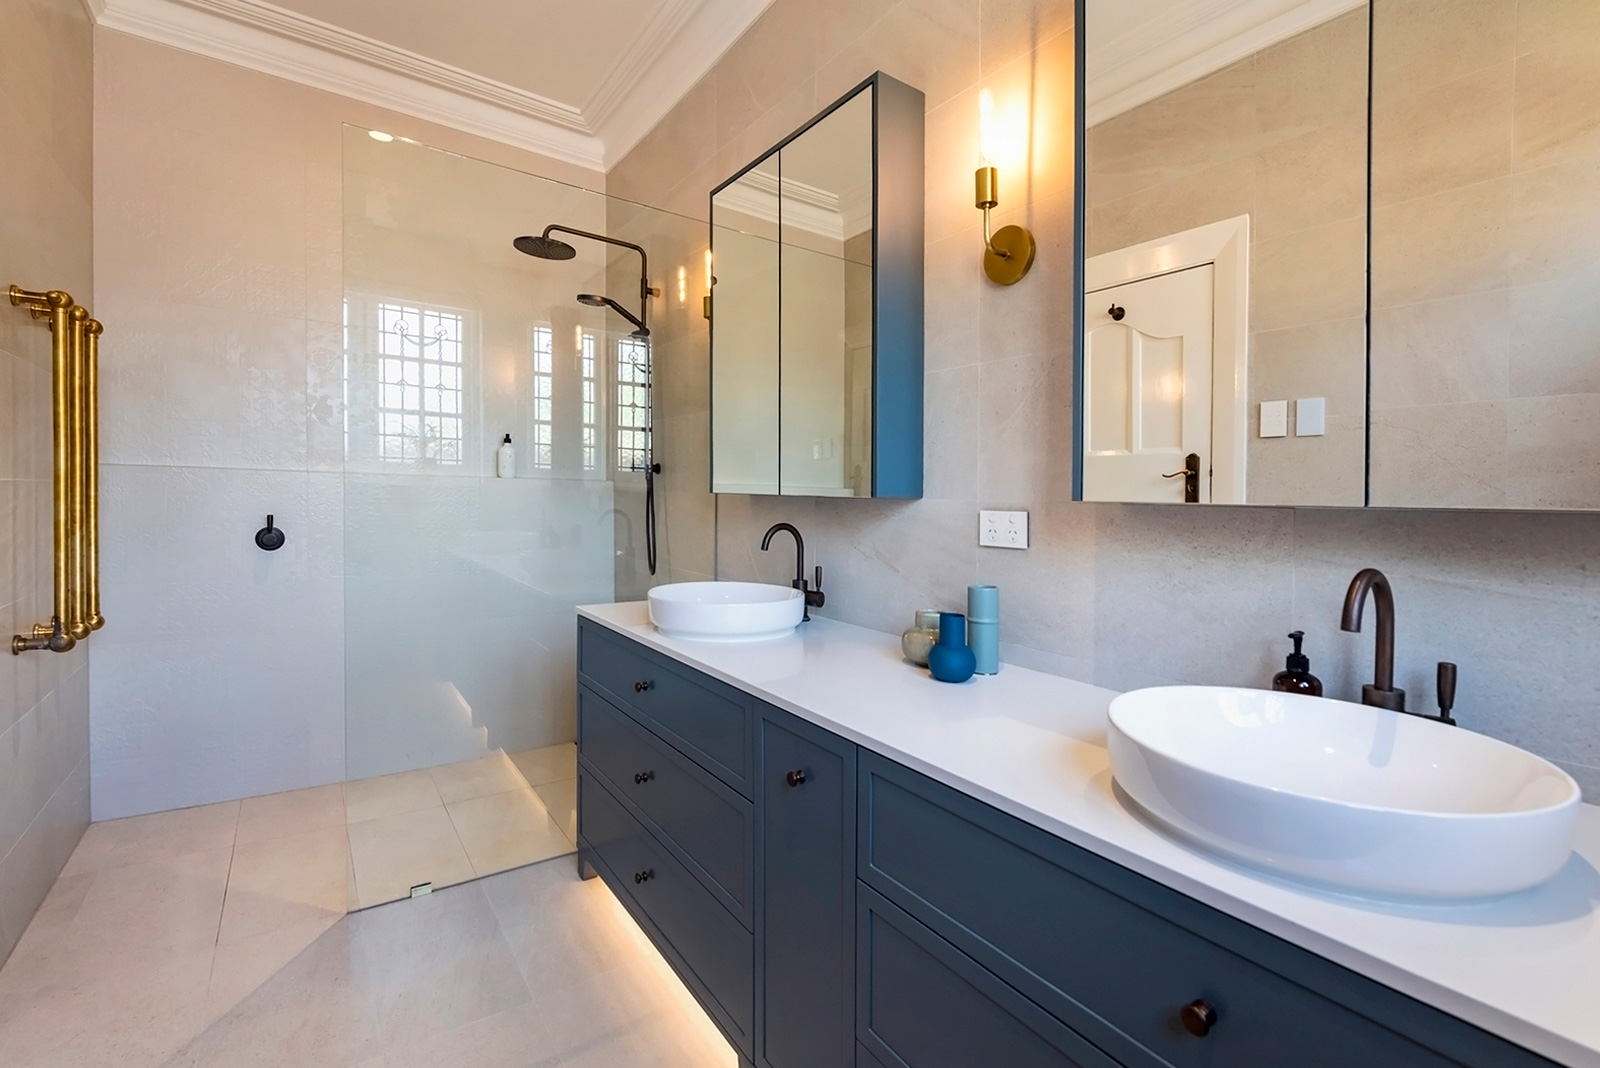 Ensuite in Costtesloe apartment with cabinetry designed by Studio Seventy Four